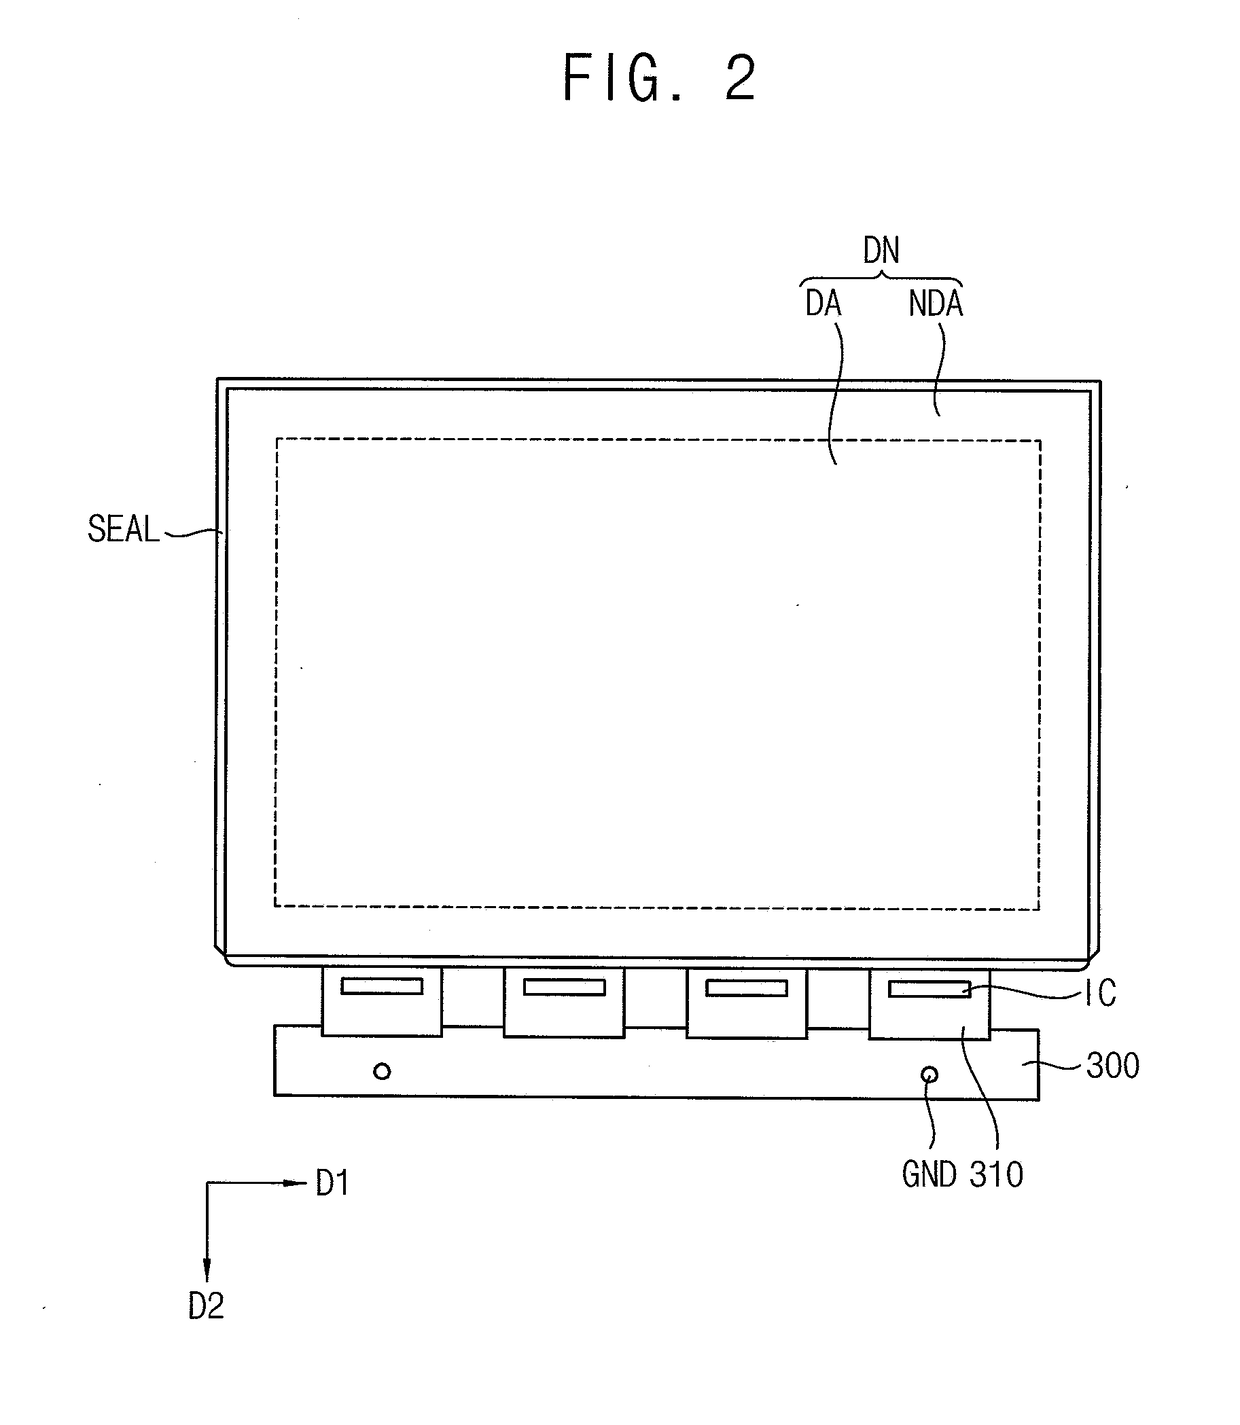 Display apparatus including a backlight assembly